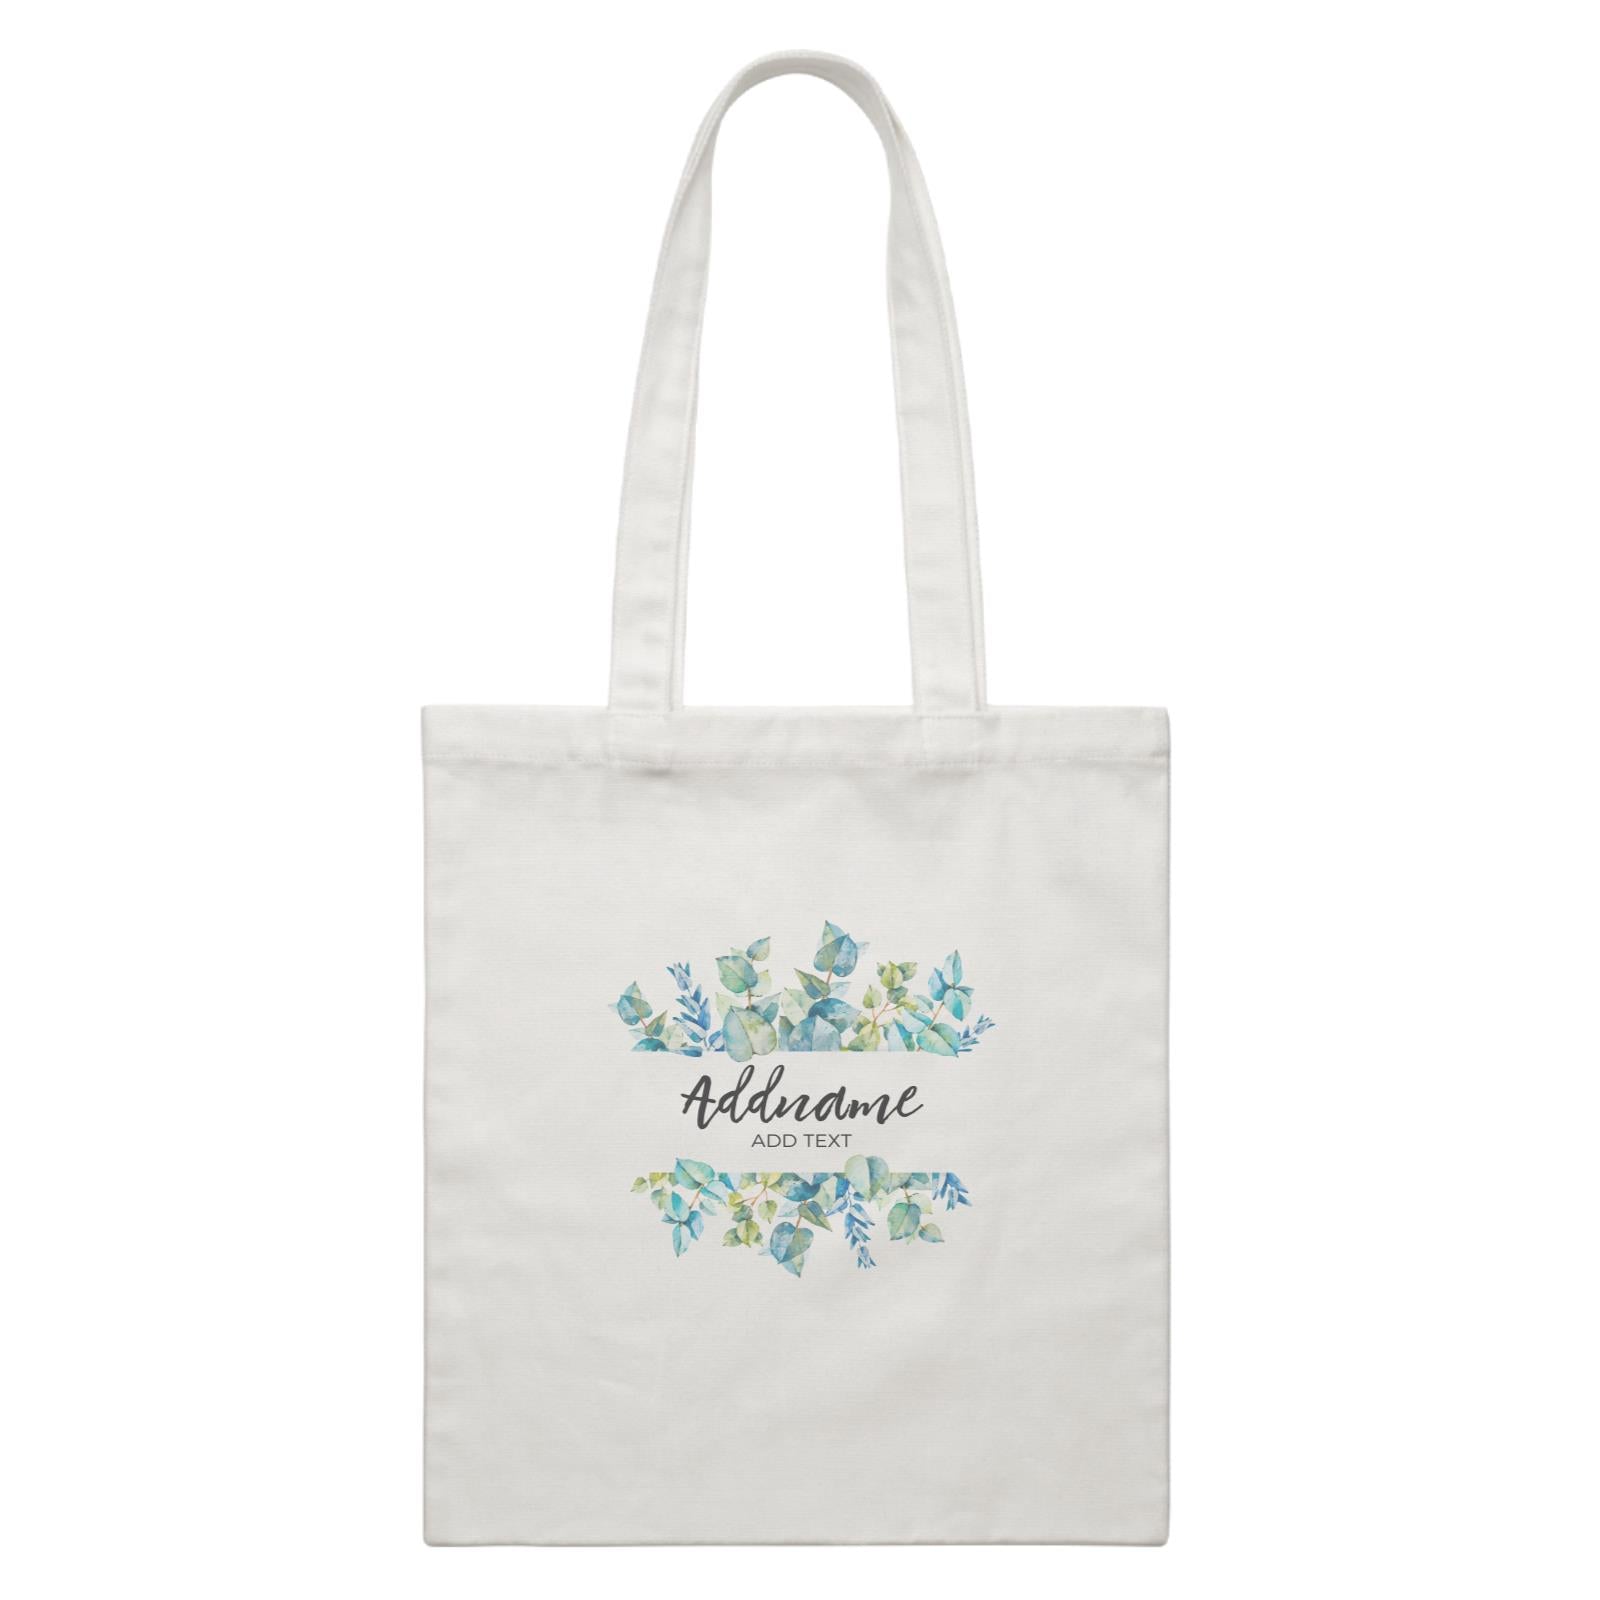 Add Your Own Text Teacher Blue Leaves Box Addname And Add Text White Canvas Bag